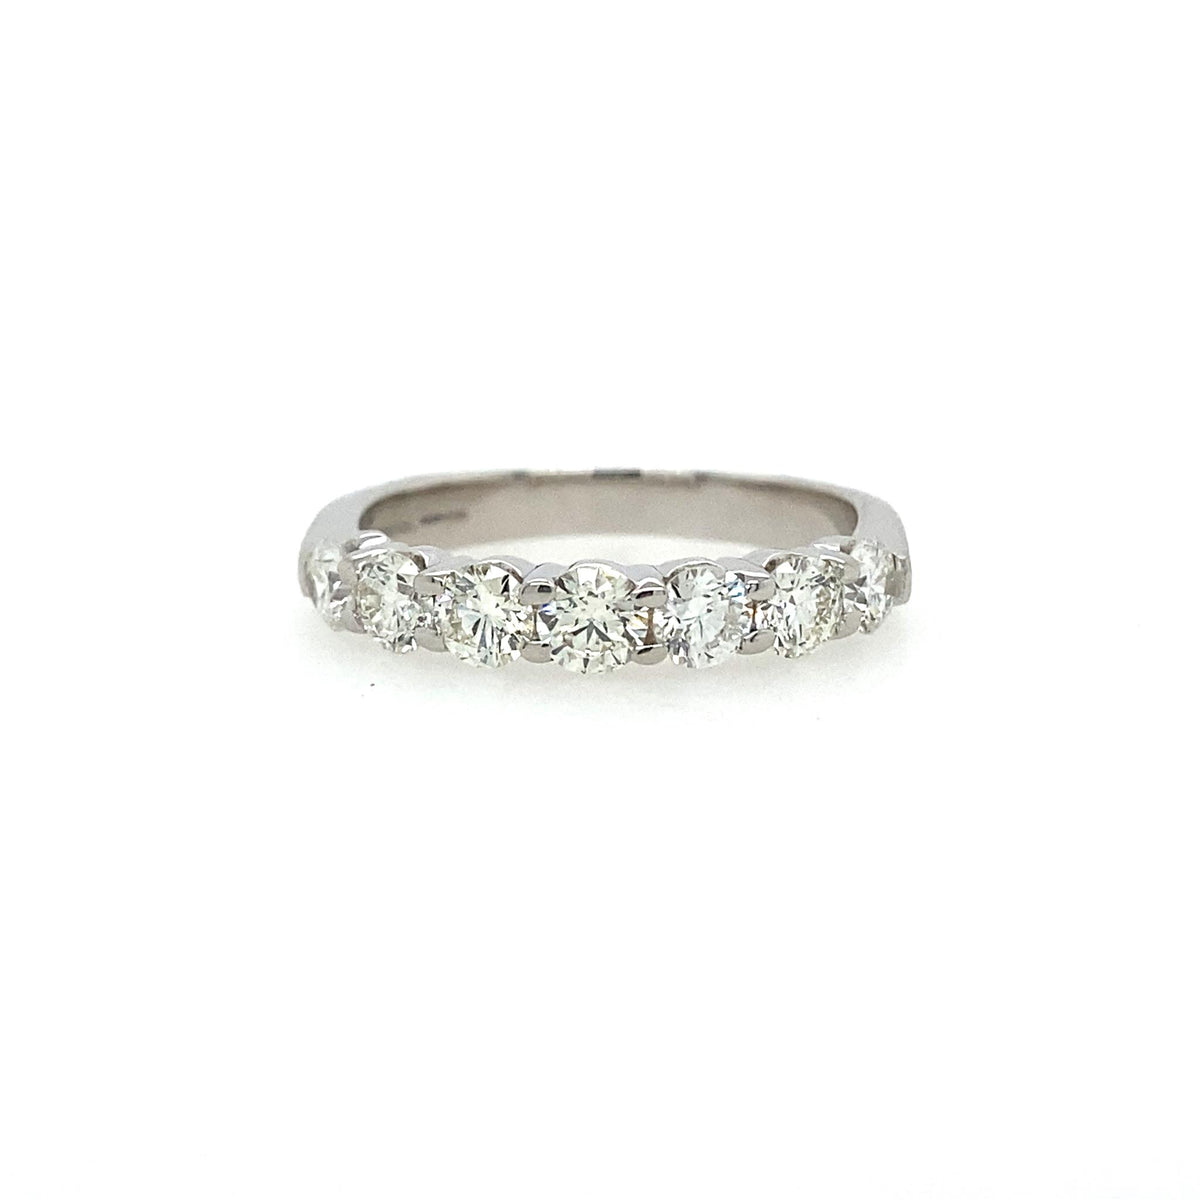 14Kt White Gold Prong Set Wedding Ring With 1.00cttw Natural Diamonds